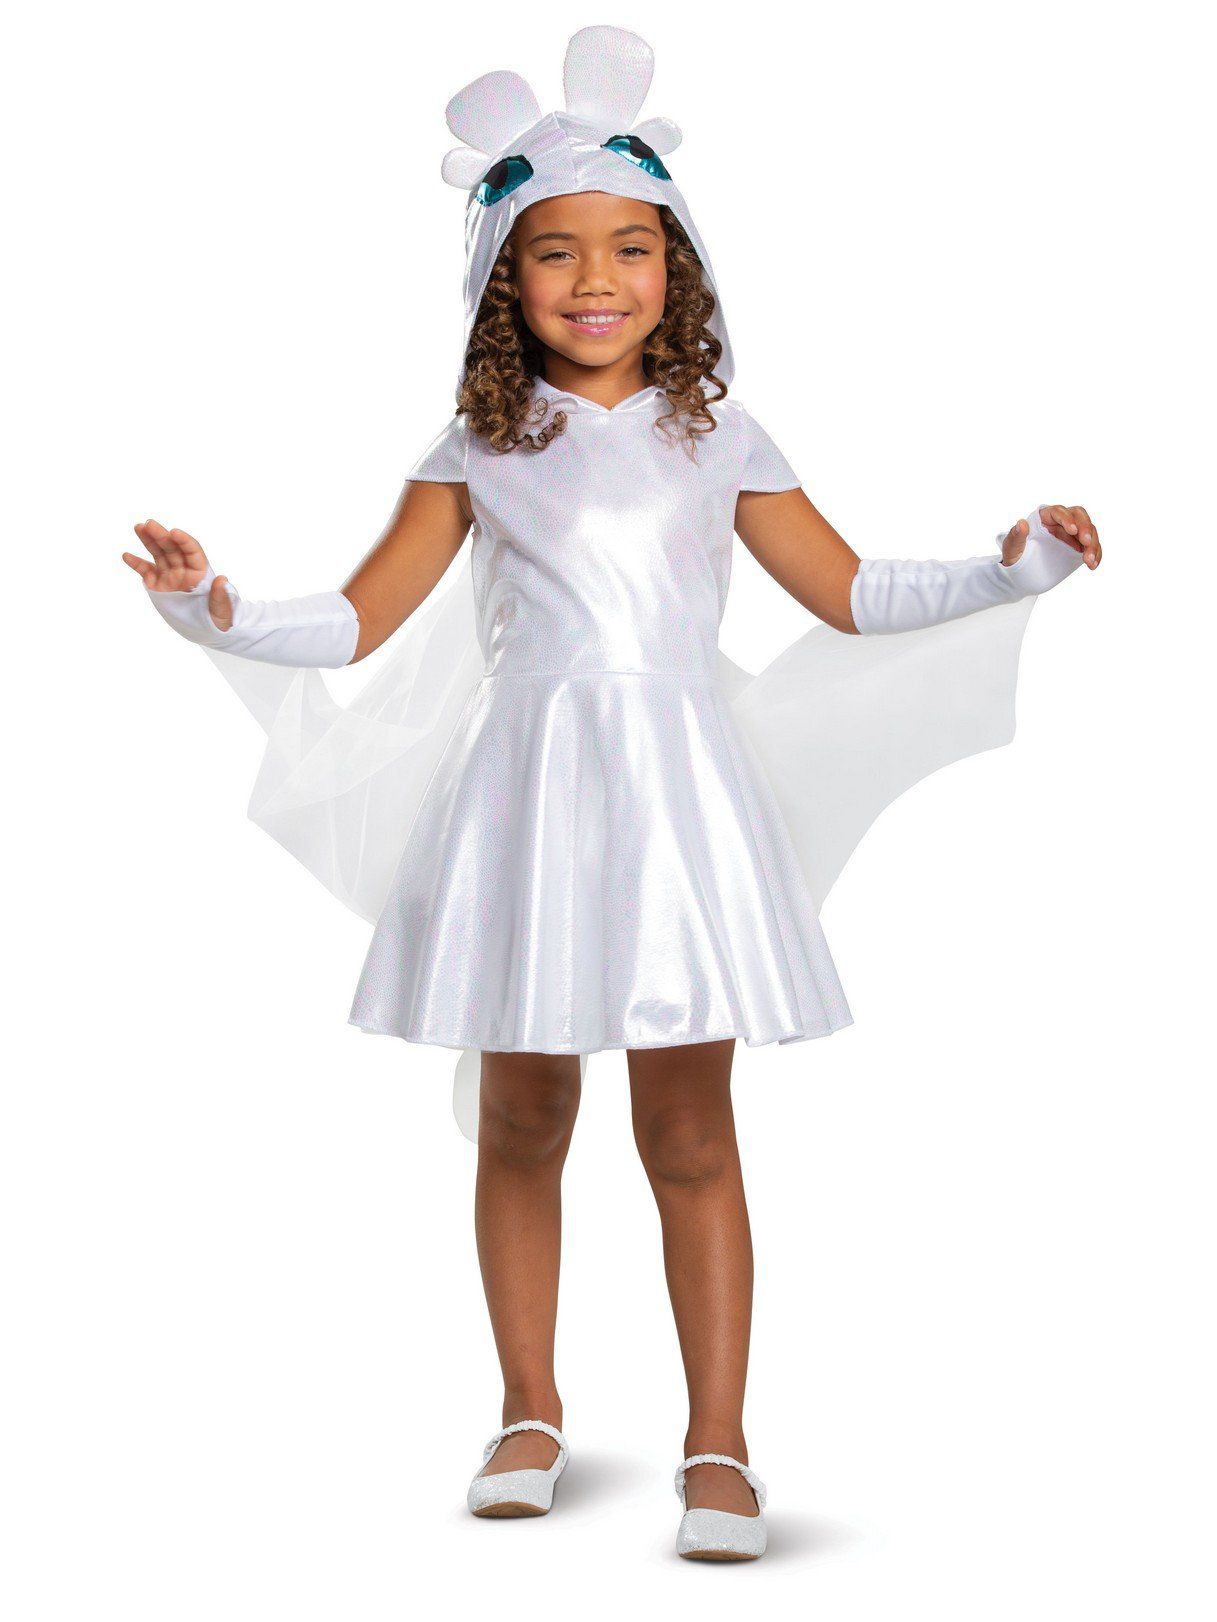 How to Train your Dragon  Light Fury Classic Child Costume